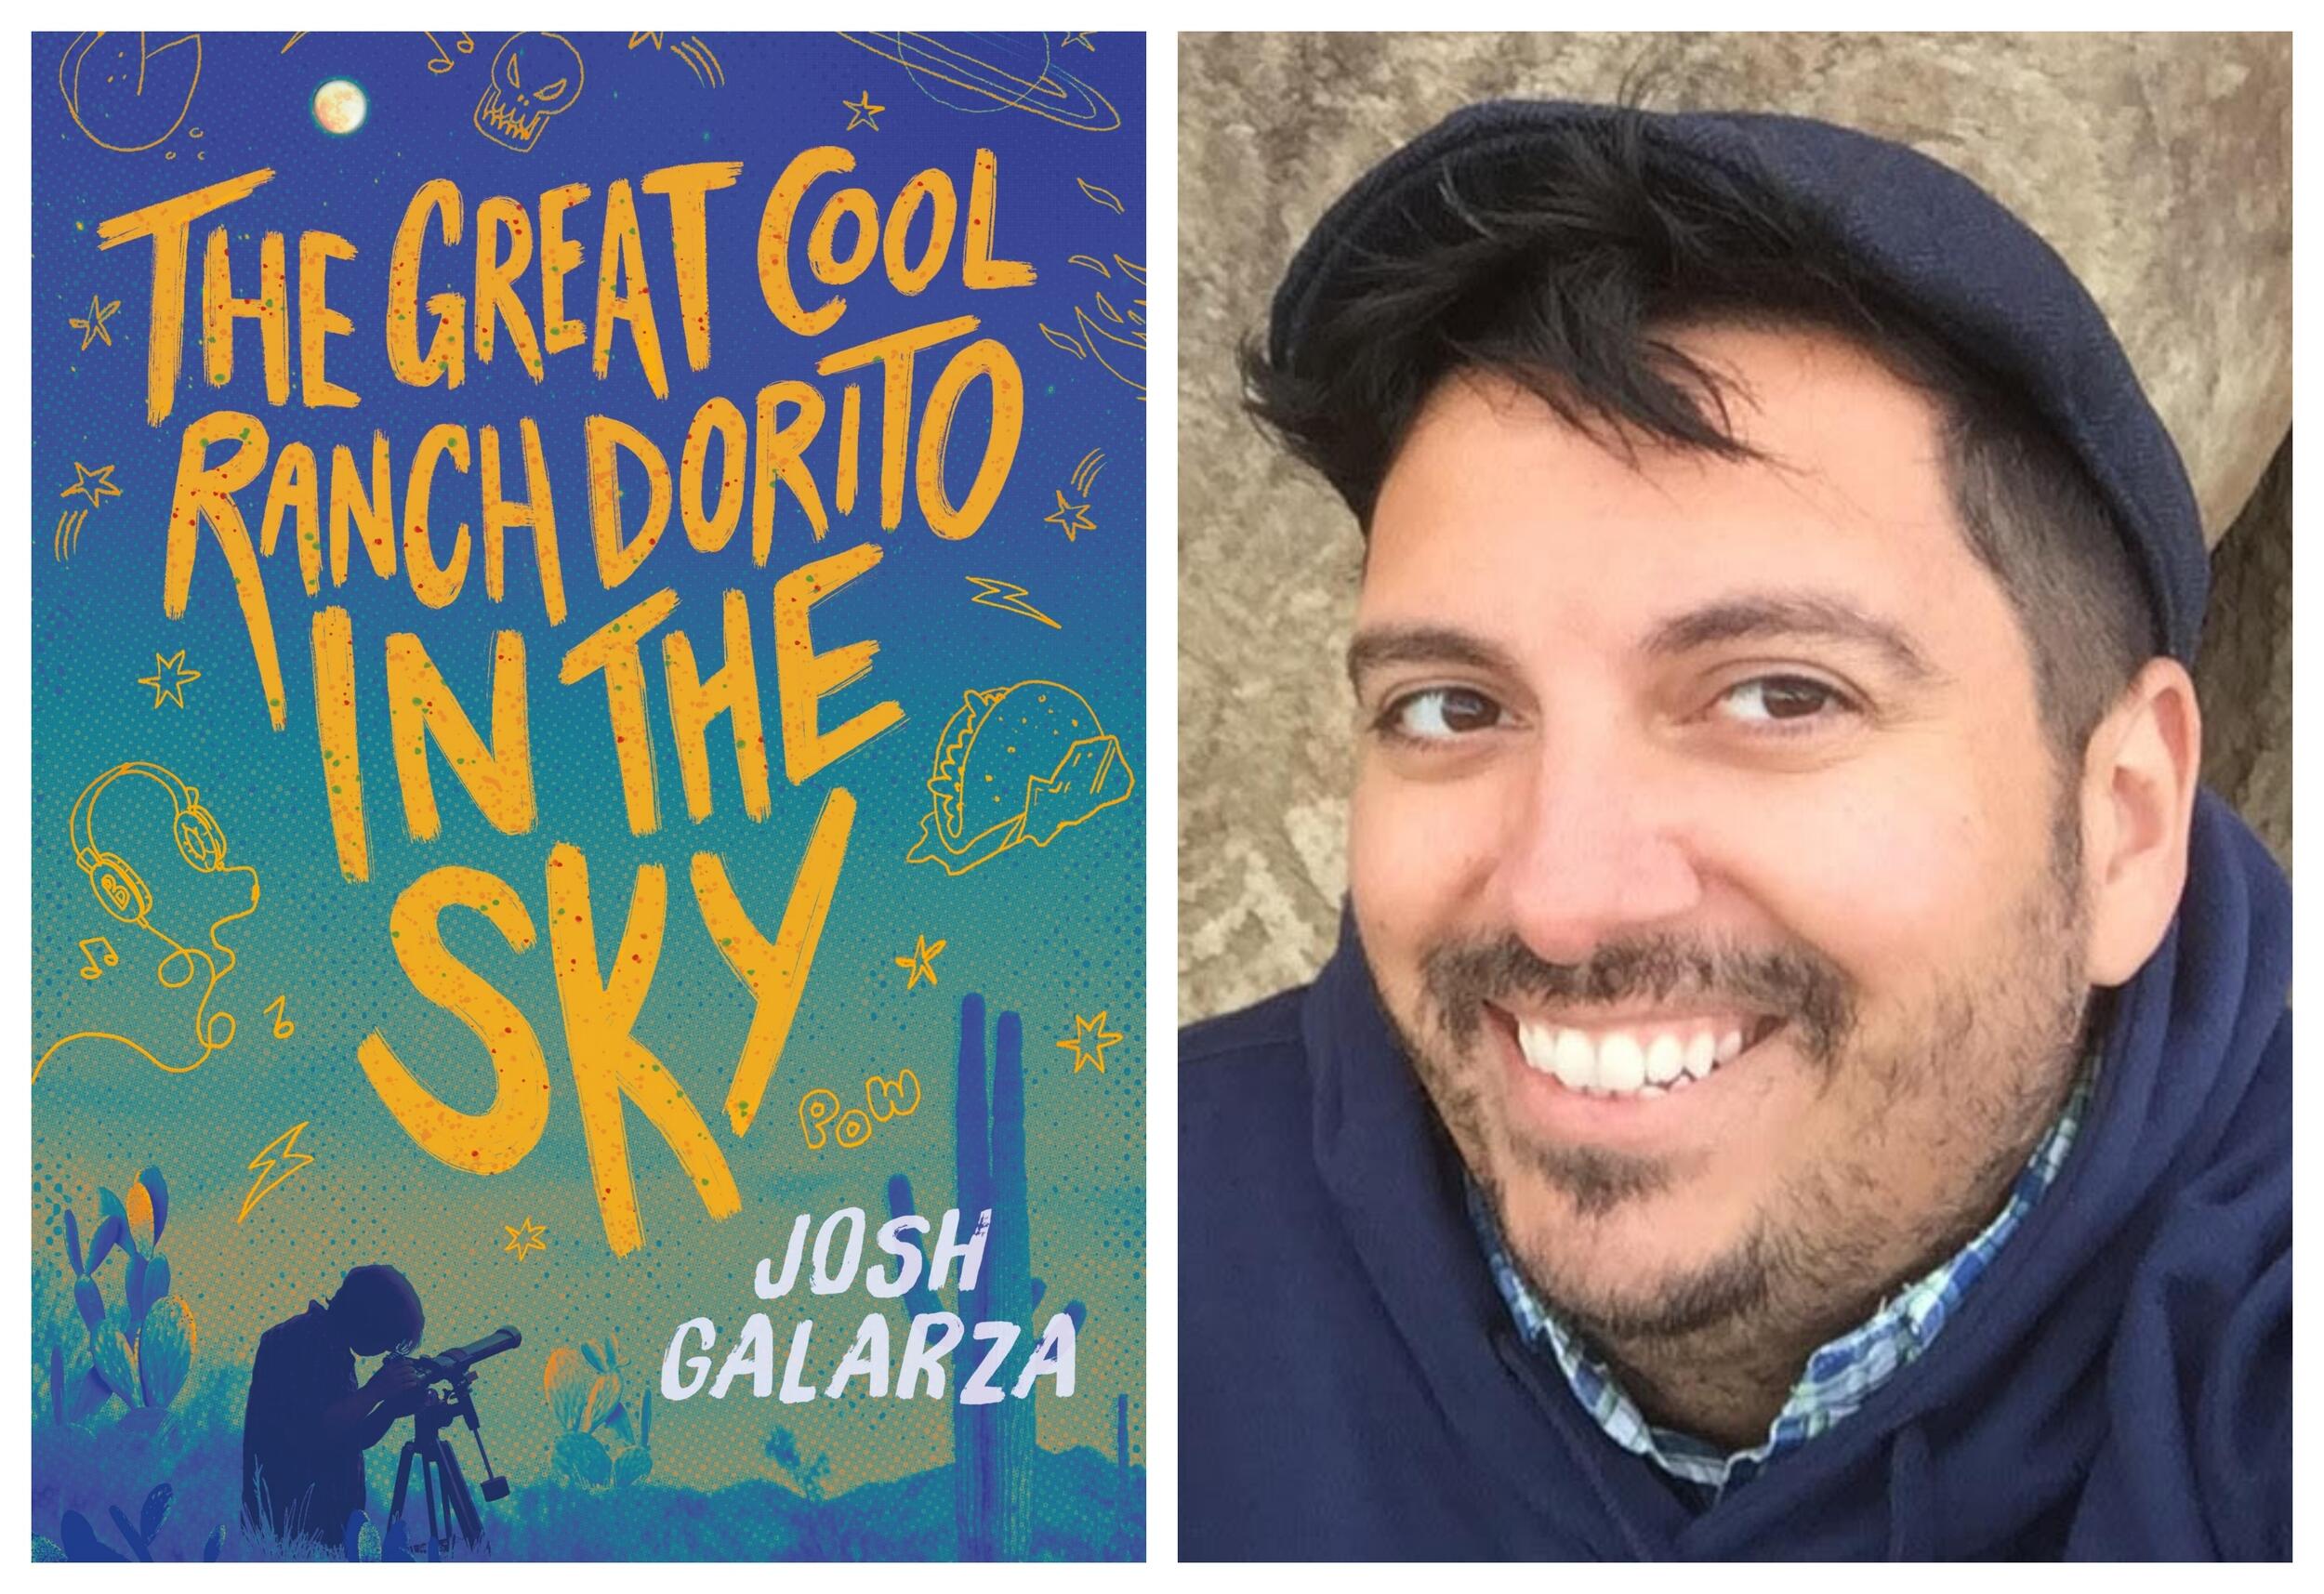 A photo of a book cover next to a photo of a man's face. The book cover has an illustration of the silhouette of a person looking throuhg a telesope. Yellow test reads \"THE GREAT COOL RANCH DORITO IN THE SKY\" and white text reads \"JOSH GALARZA\"